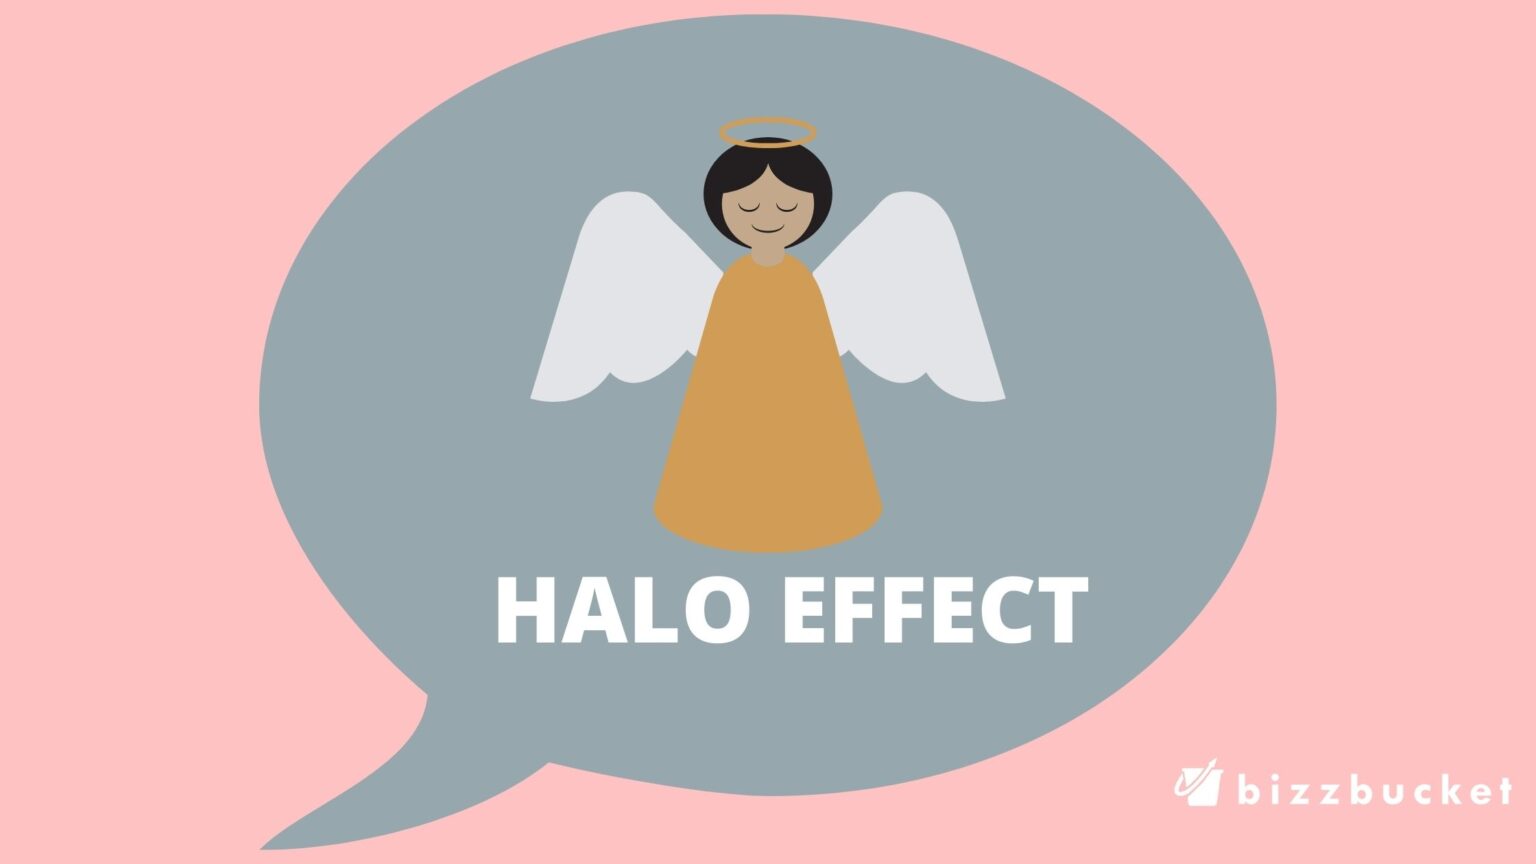 Why effect. Halo Effect.